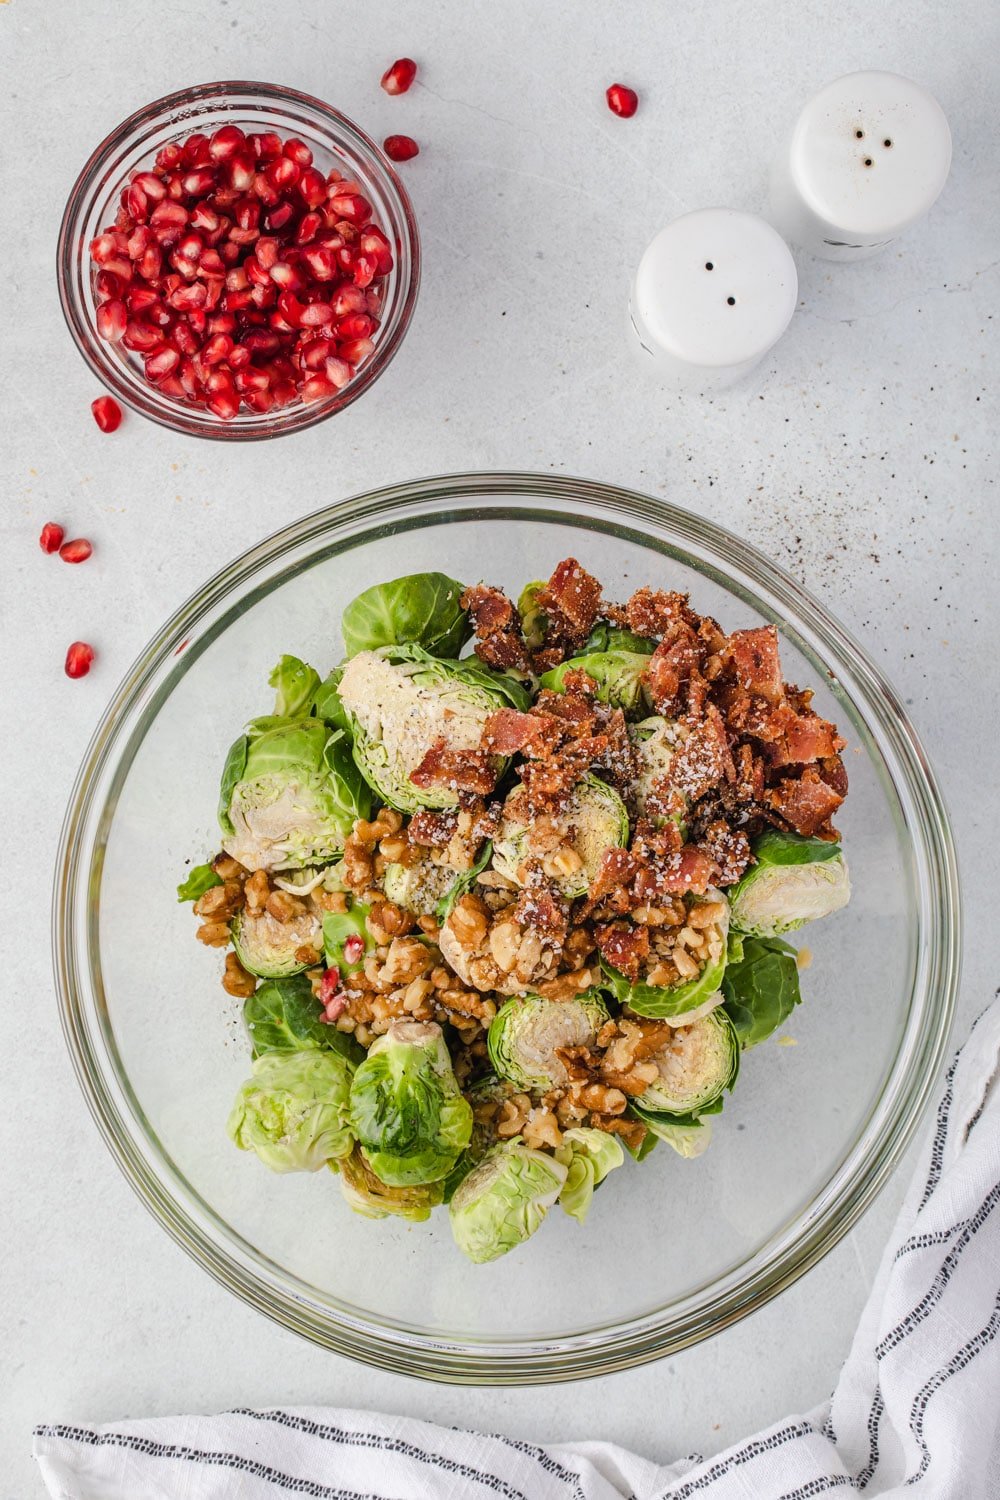 Bowl of brussels sprouts ingredients with pomegranate bowl on the side.